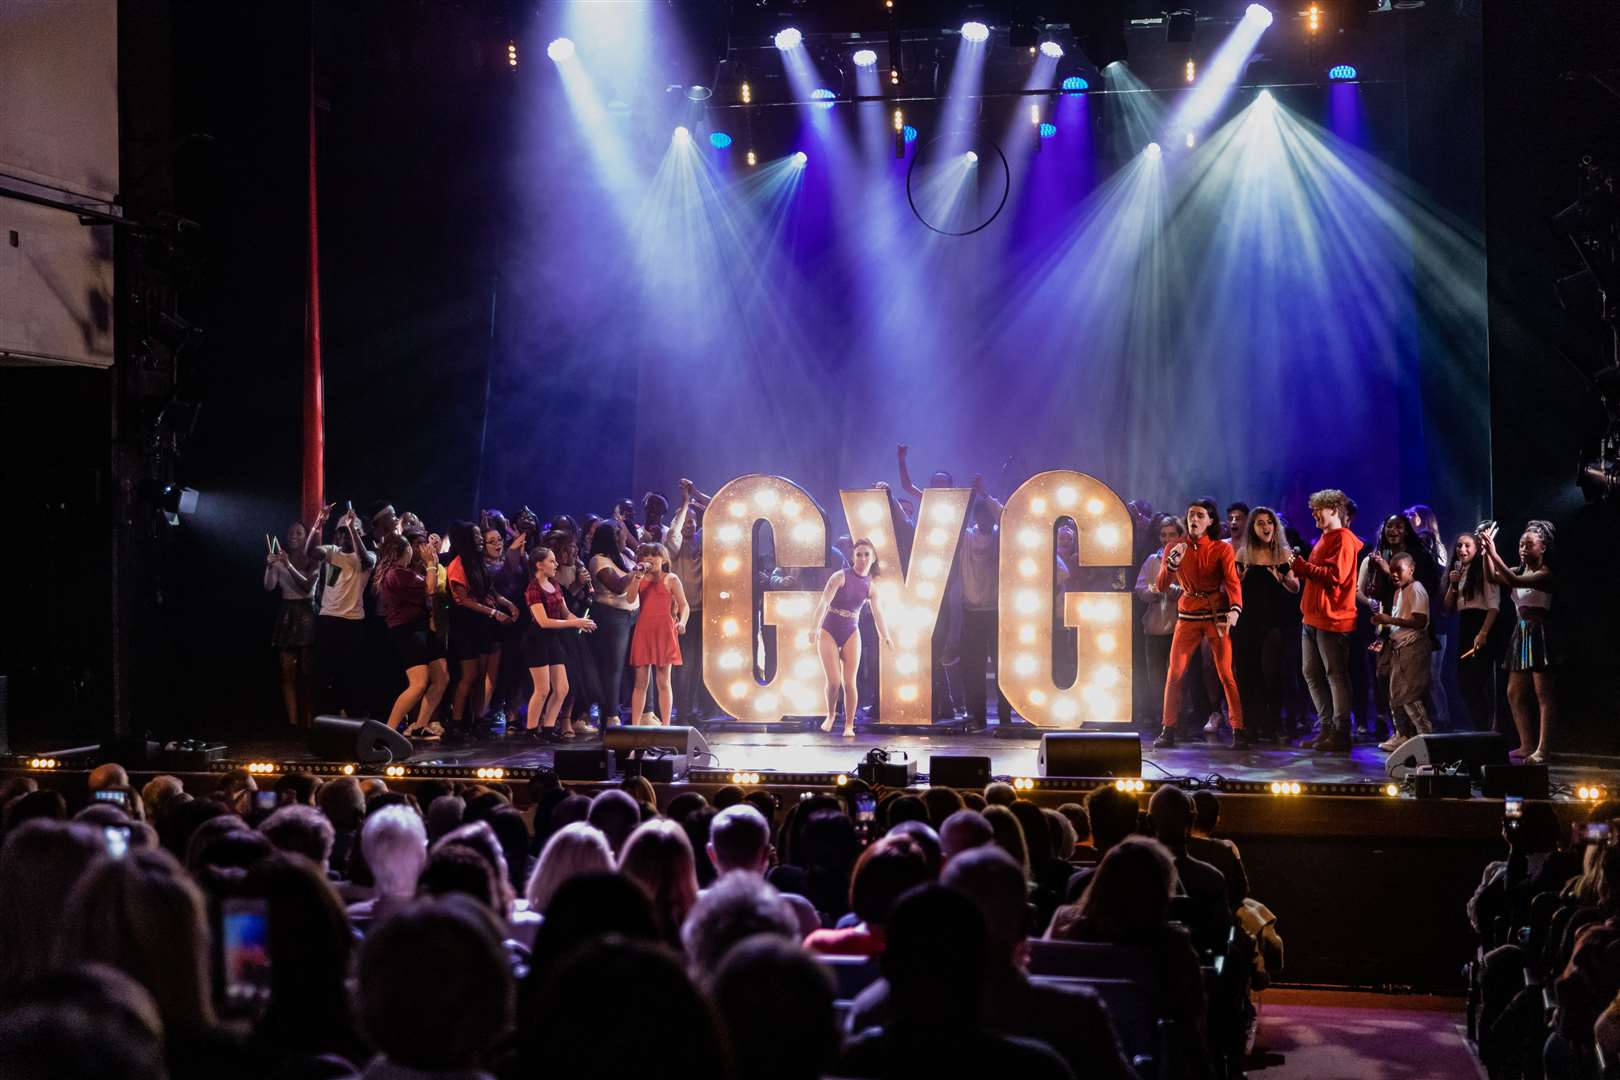 GYG's website will have resources to help young people